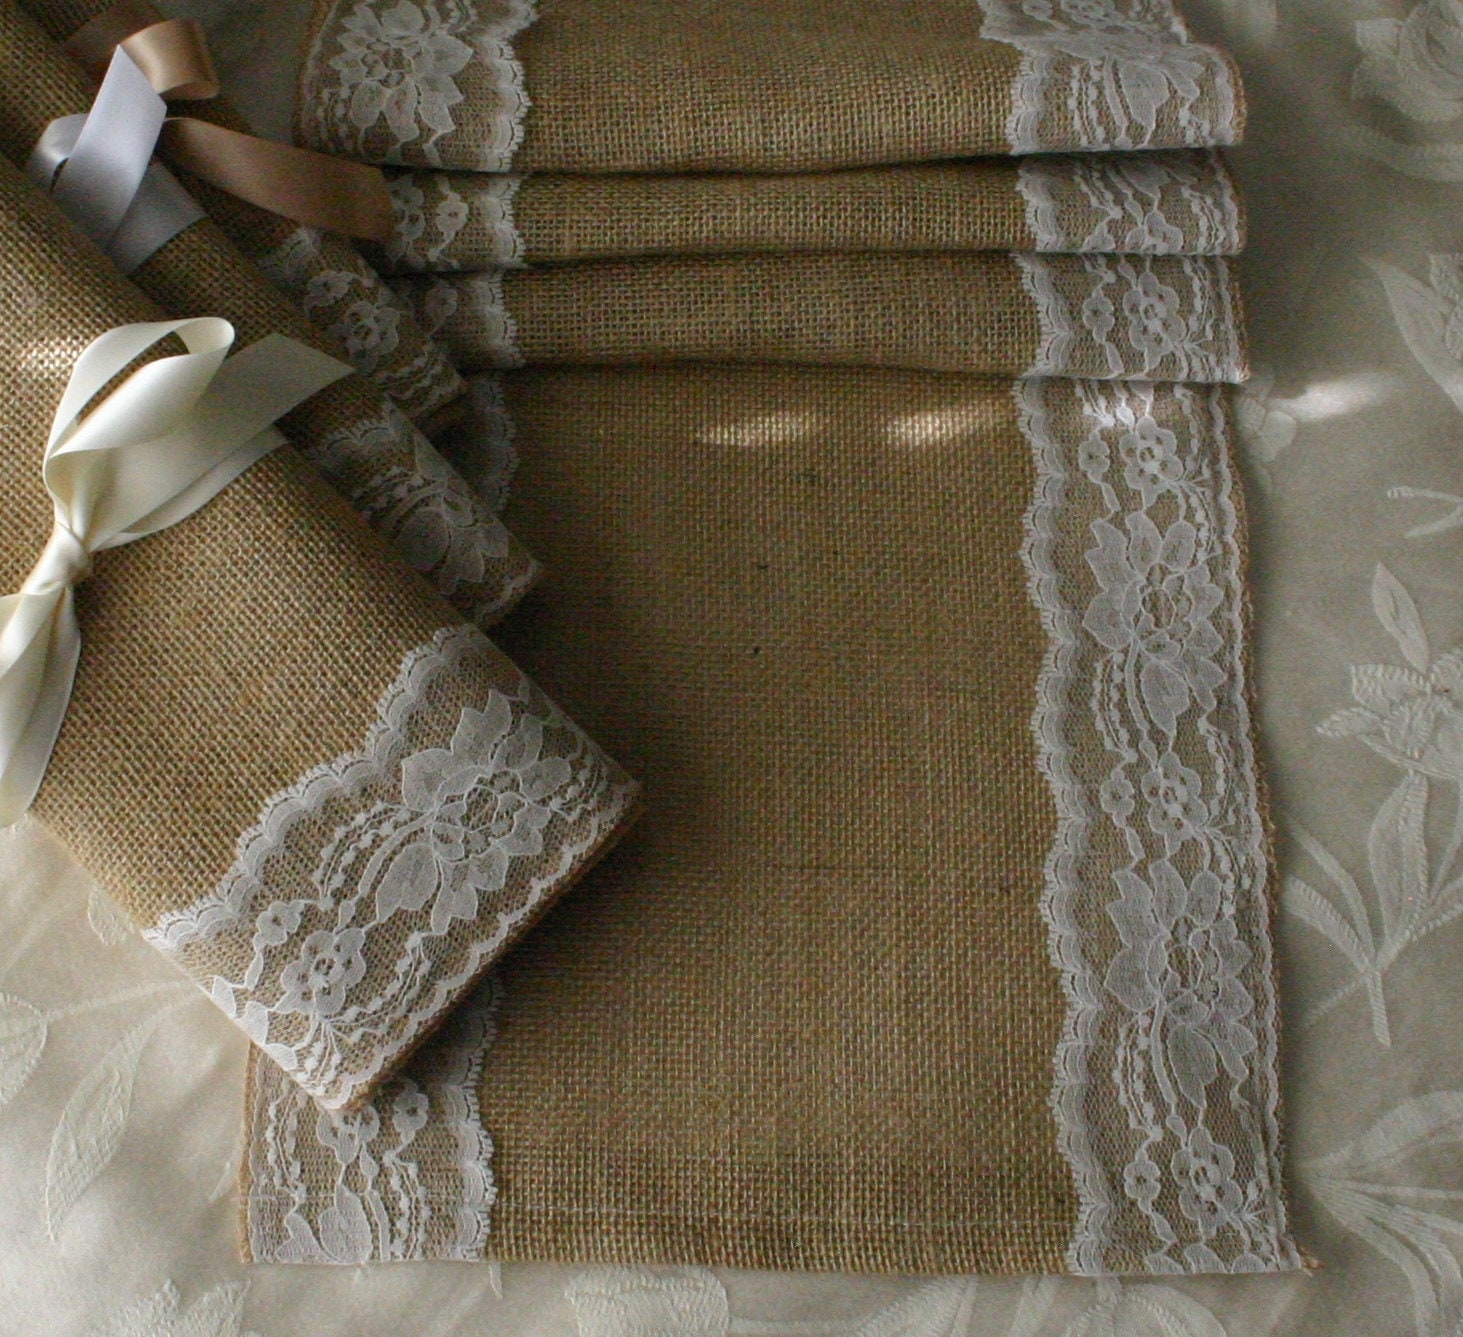 Burlap and lace runner